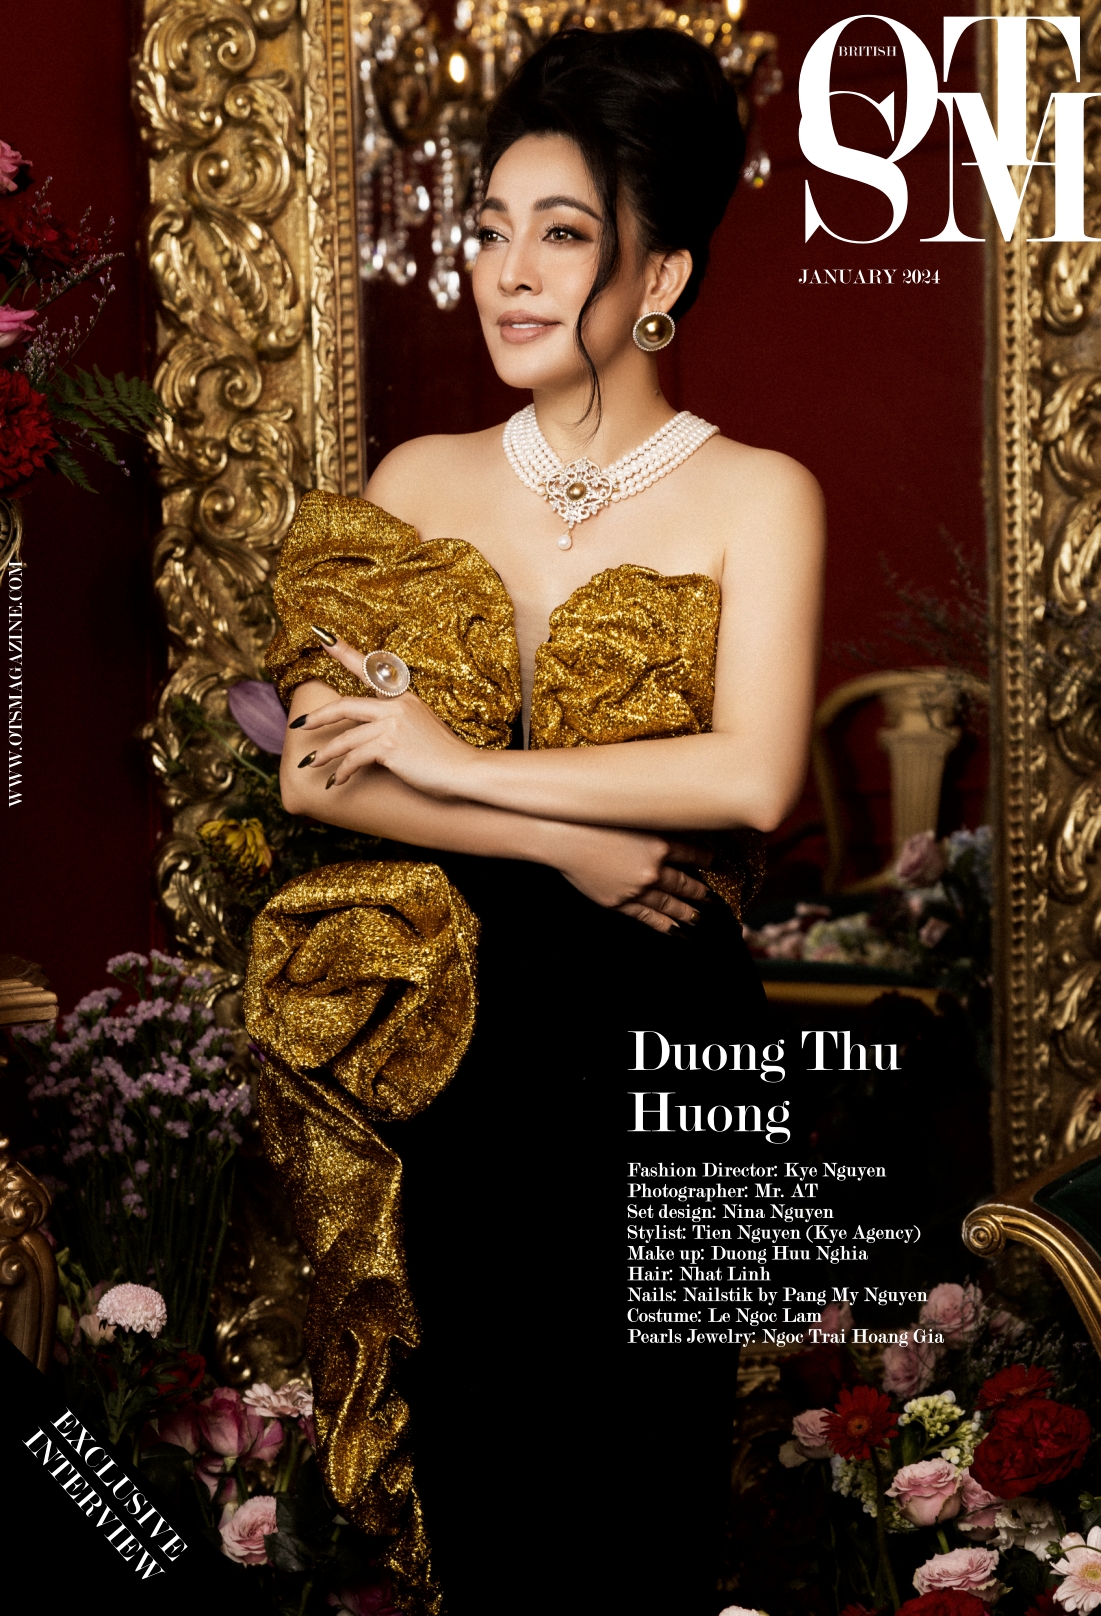 Duong Thu Huong 'Chairwoman & Founder -Scent of Autumn Investment' and Former CEO of Forbes Vietnam.